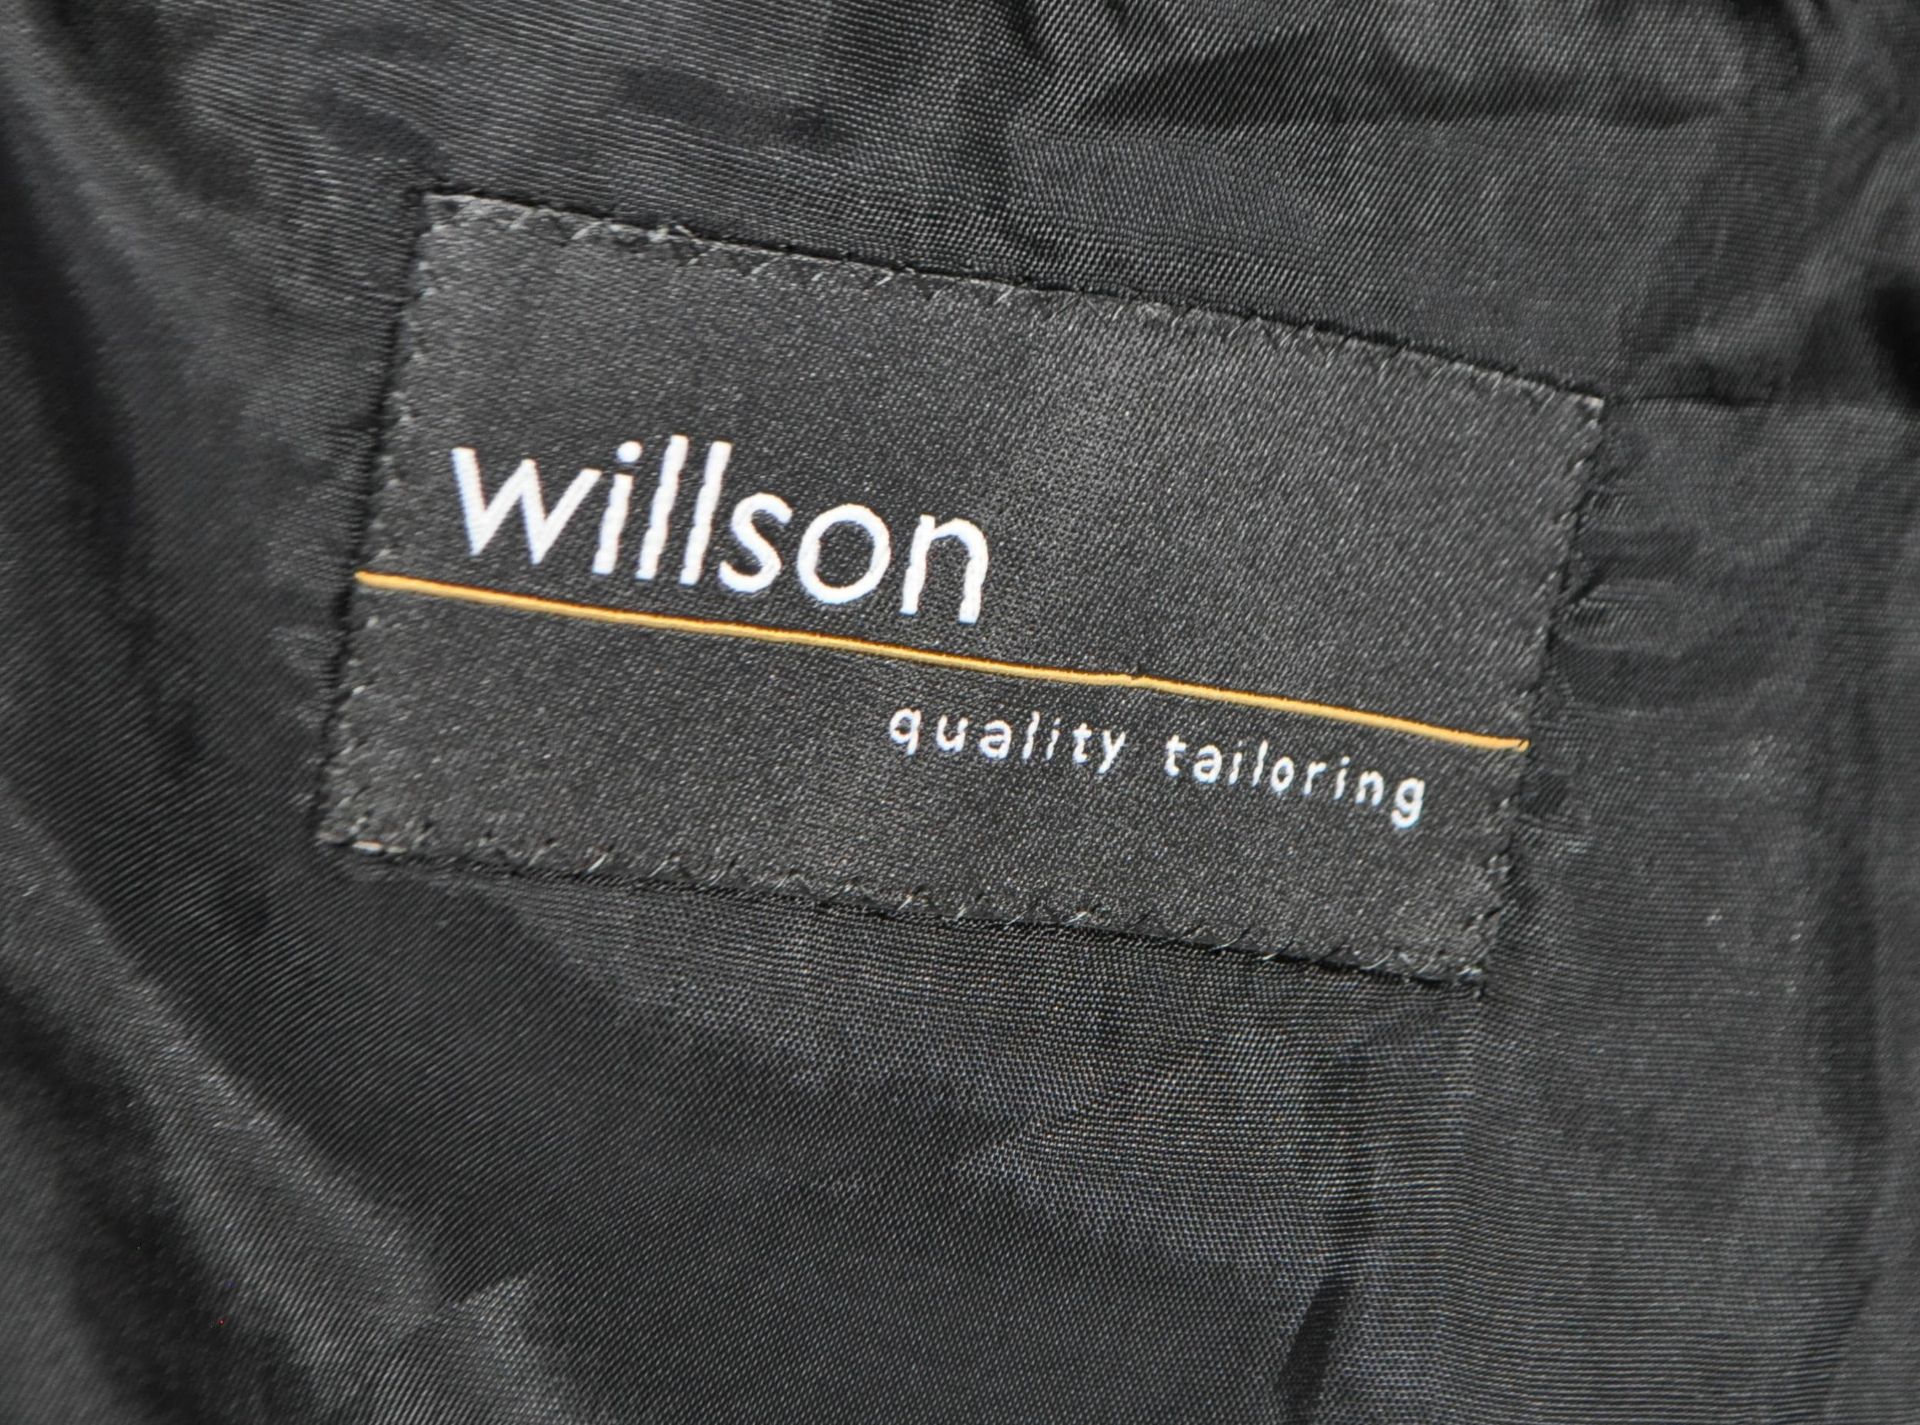 CONTEMPORARY TROUSER / JACKET SUITE BY WILLSON TAILORING - Image 3 of 5